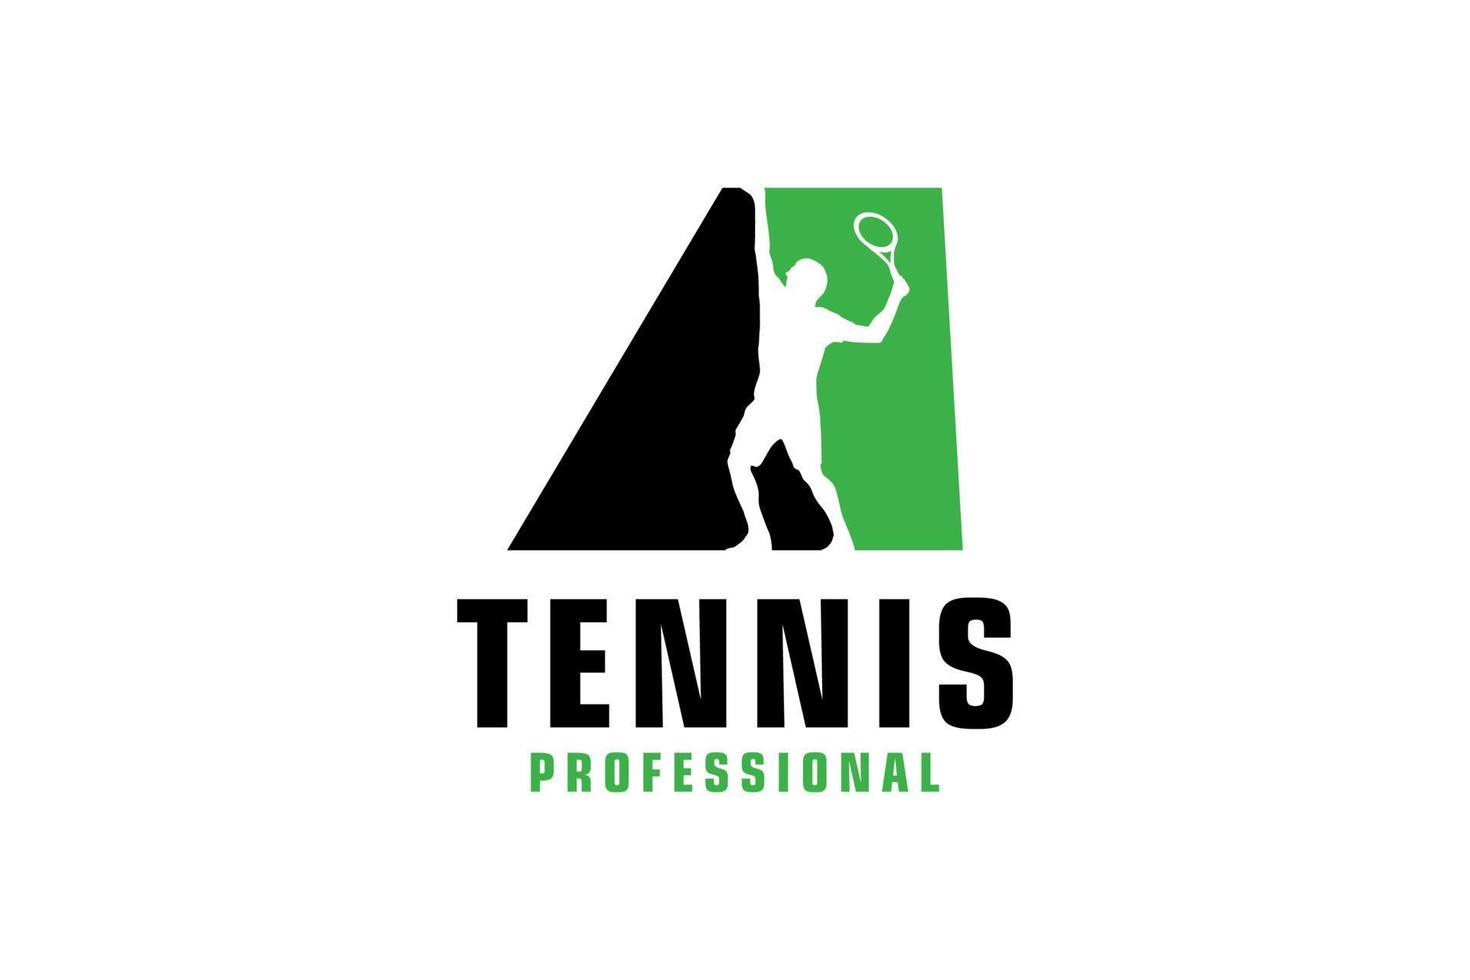 Letter A with Tennis player silhouette Logo Design. Vector Design Template Elements for Sport Team or Corporate Identity.